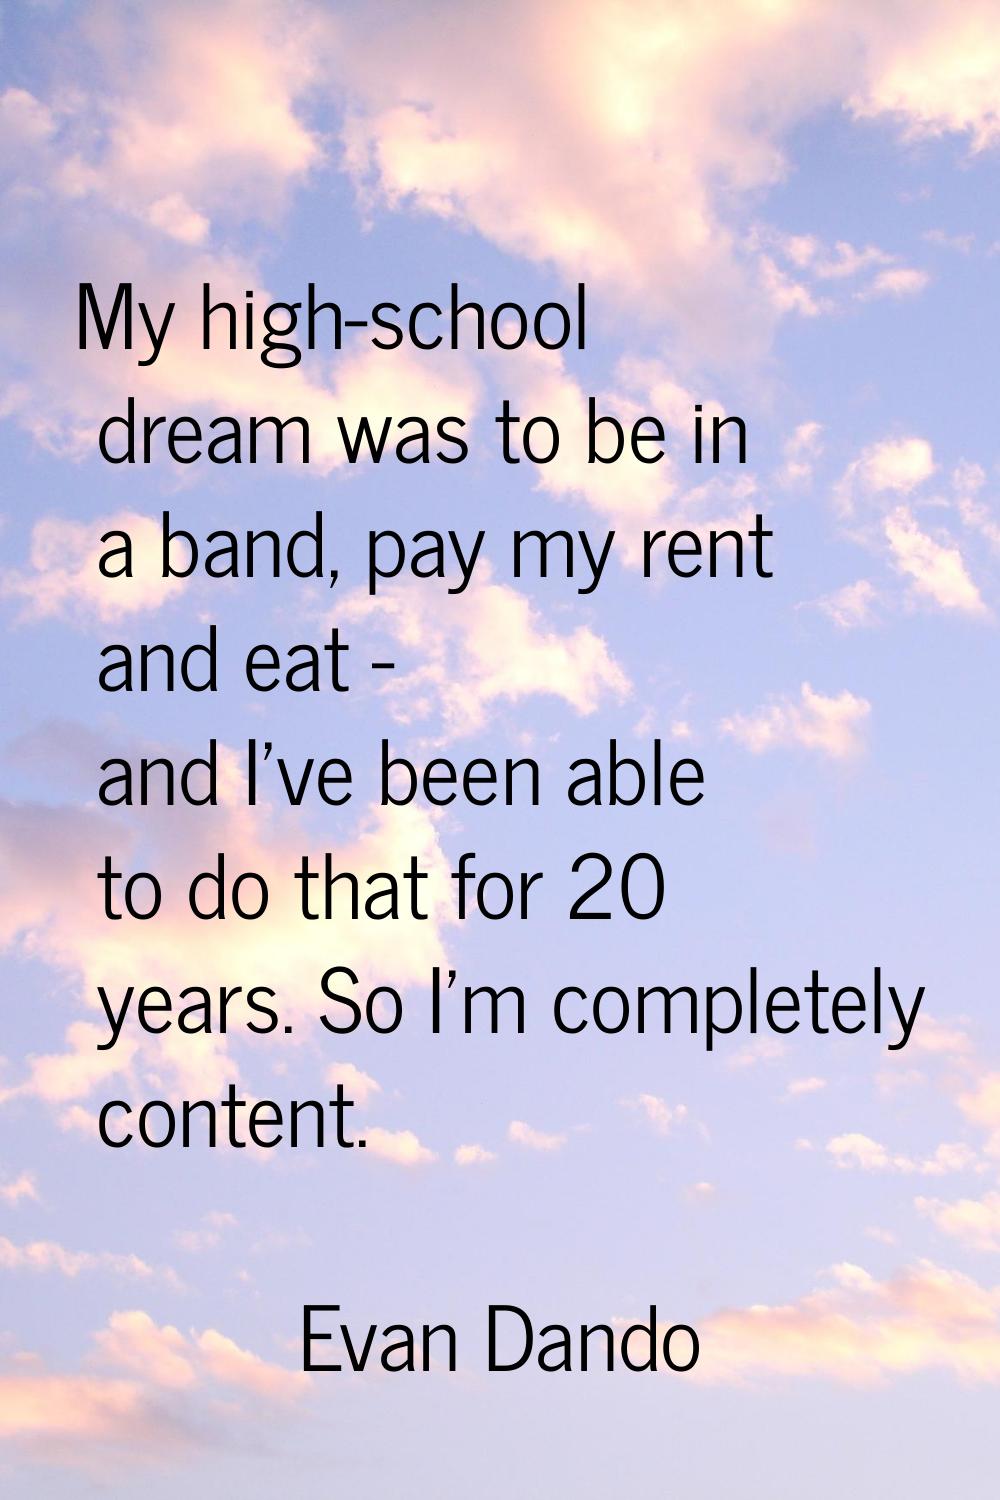 My high-school dream was to be in a band, pay my rent and eat - and I've been able to do that for 2